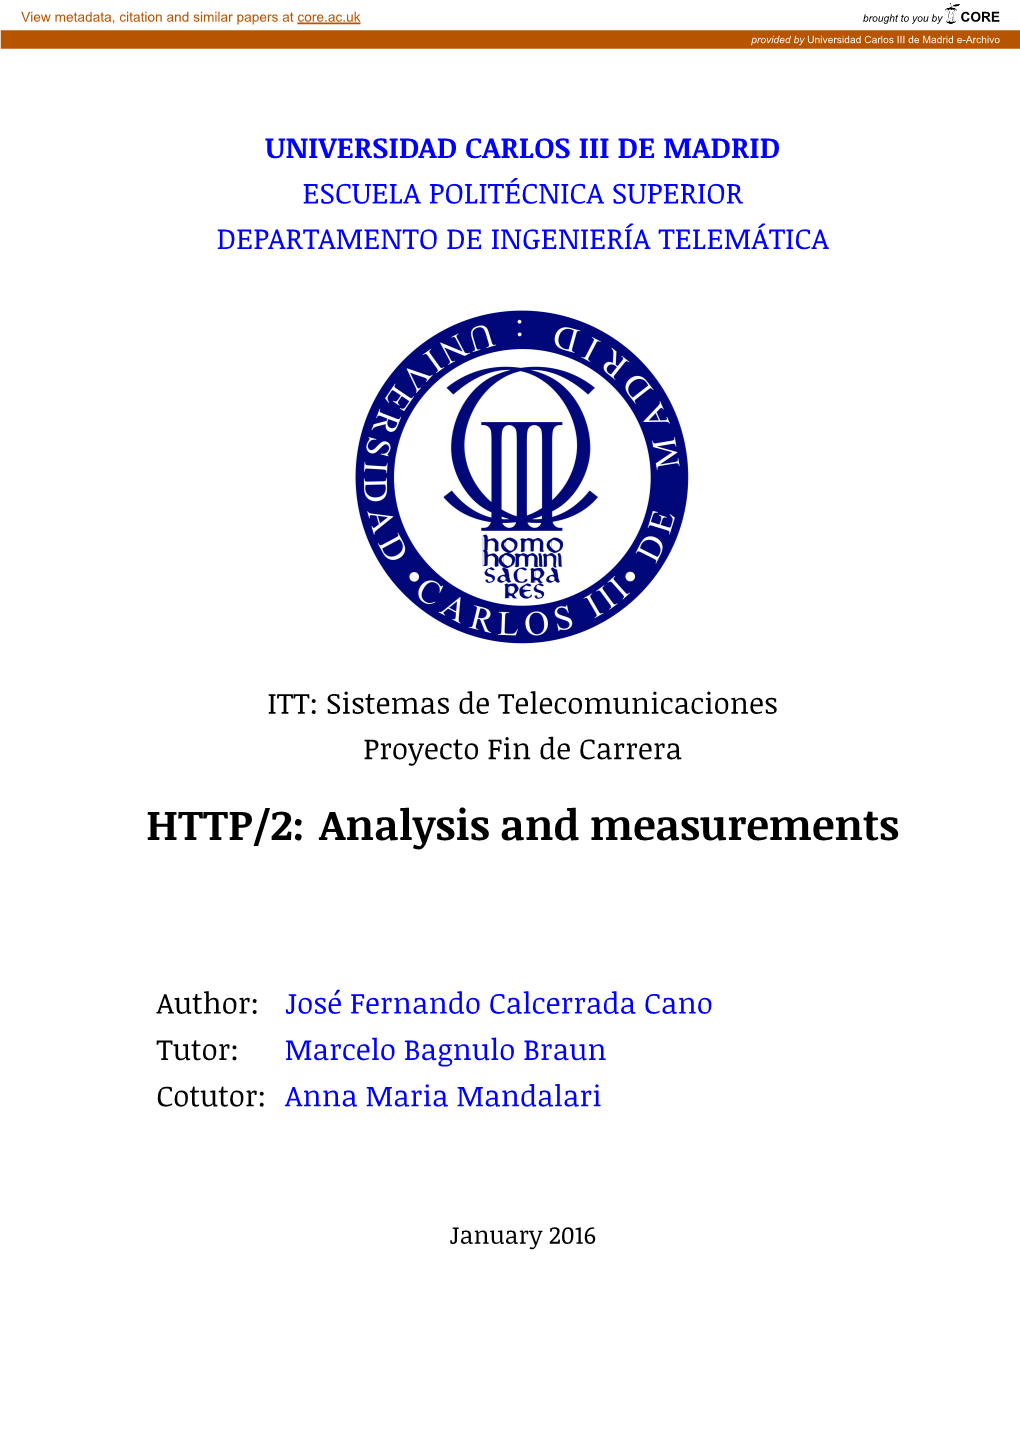 HTTP/2: Analysis and Measurements